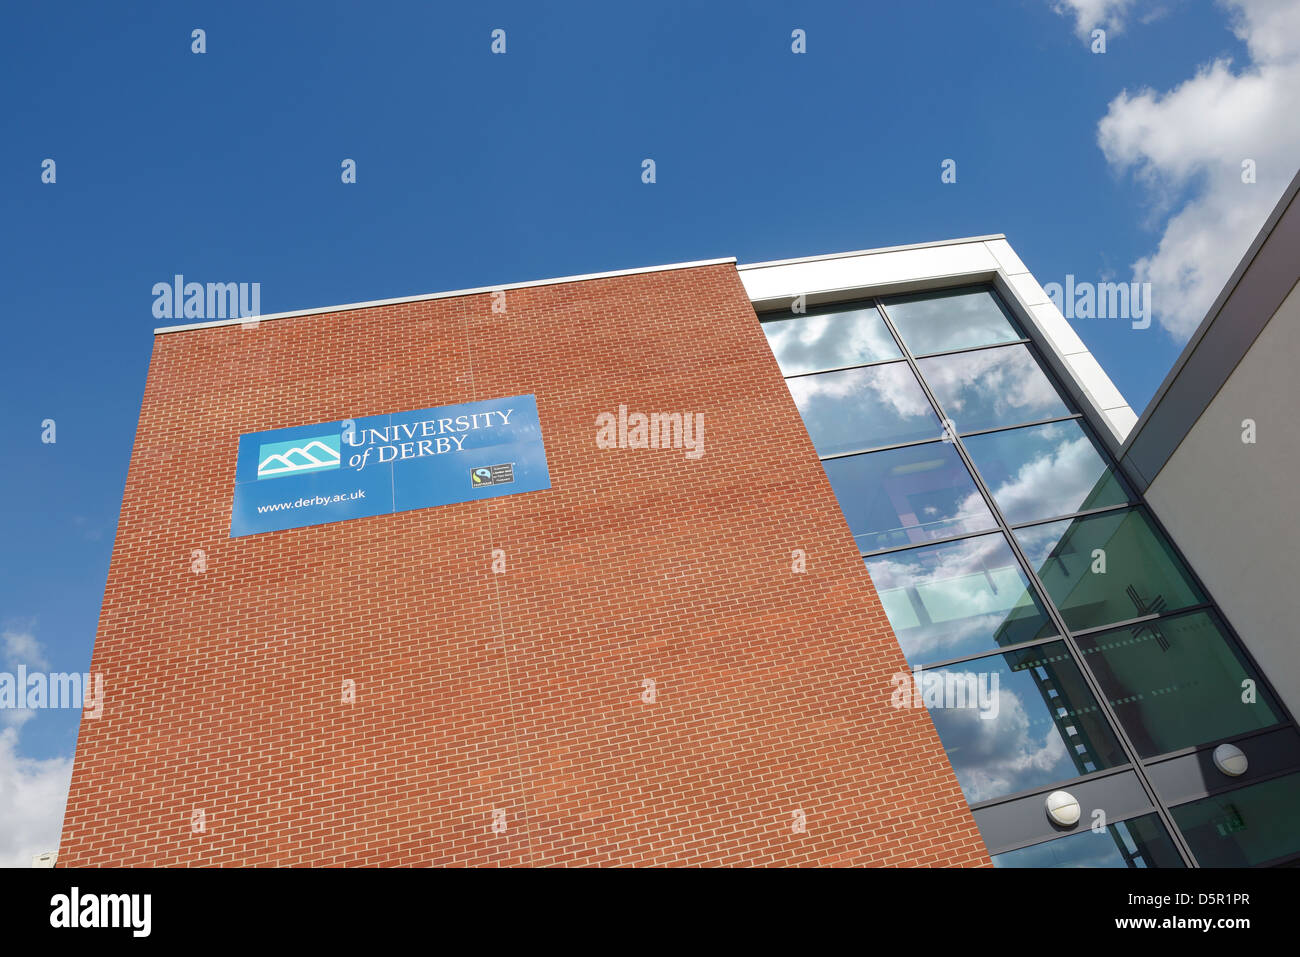 Faculty of Arts Design and Technology University of Derby UK Stock Photo